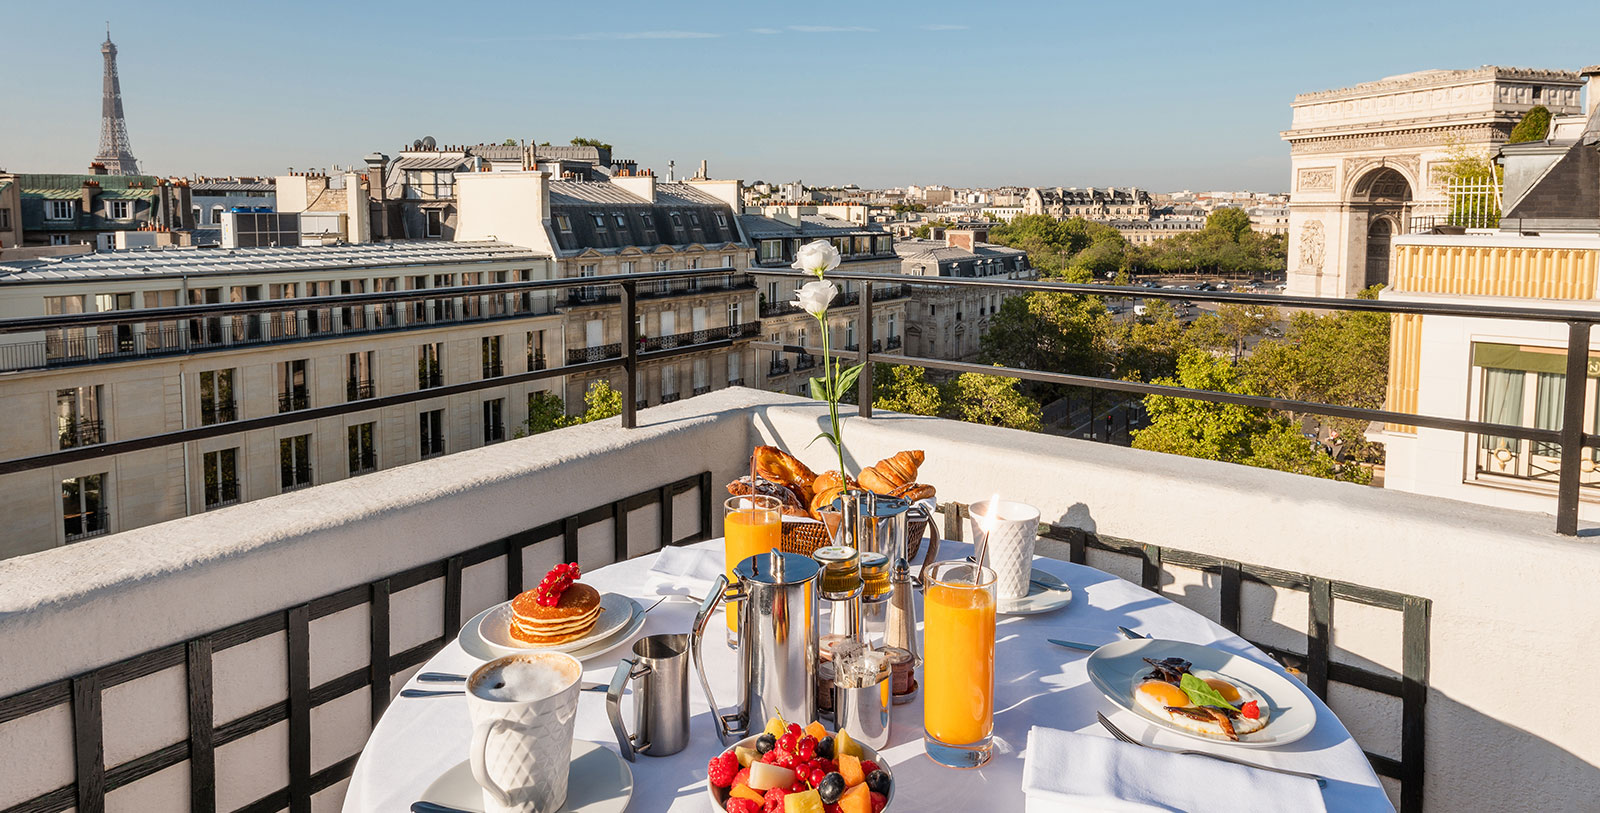 Experience the spectacular views from atop Hotel Napoleon.